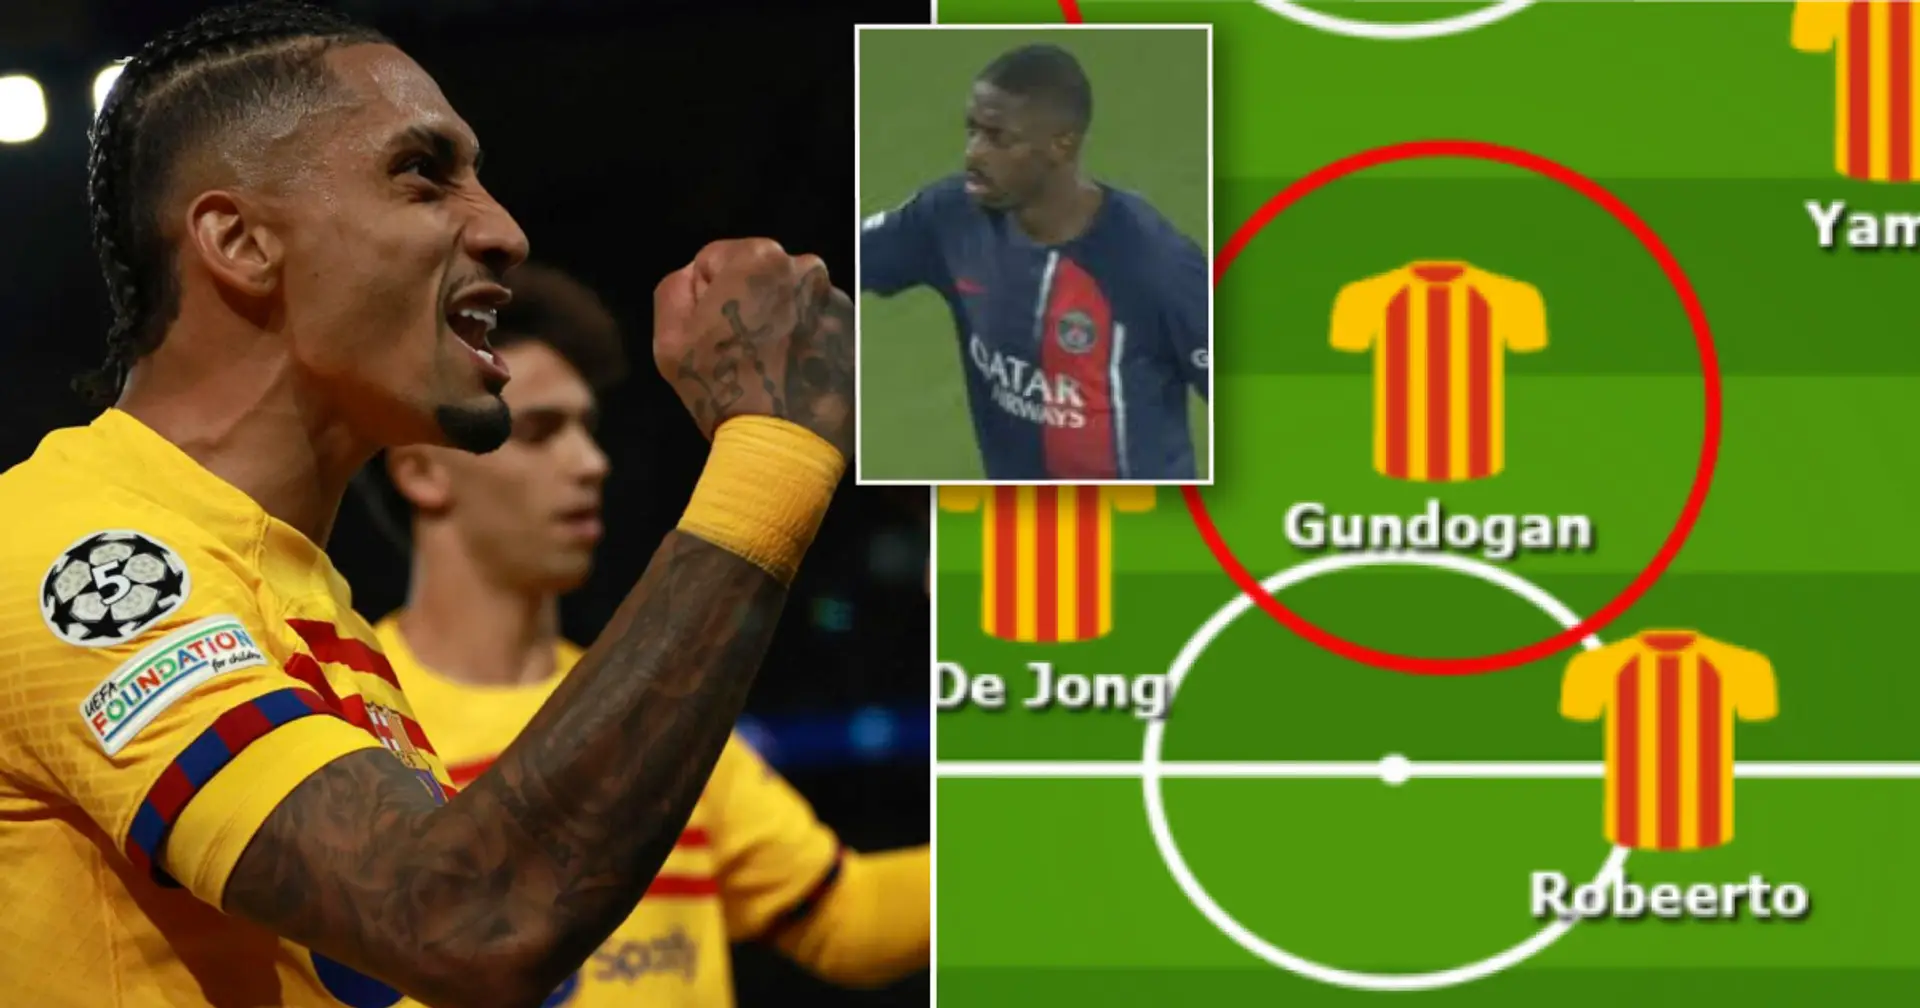 Barcelona's biggest strength in massive Paris victory shown in lineup